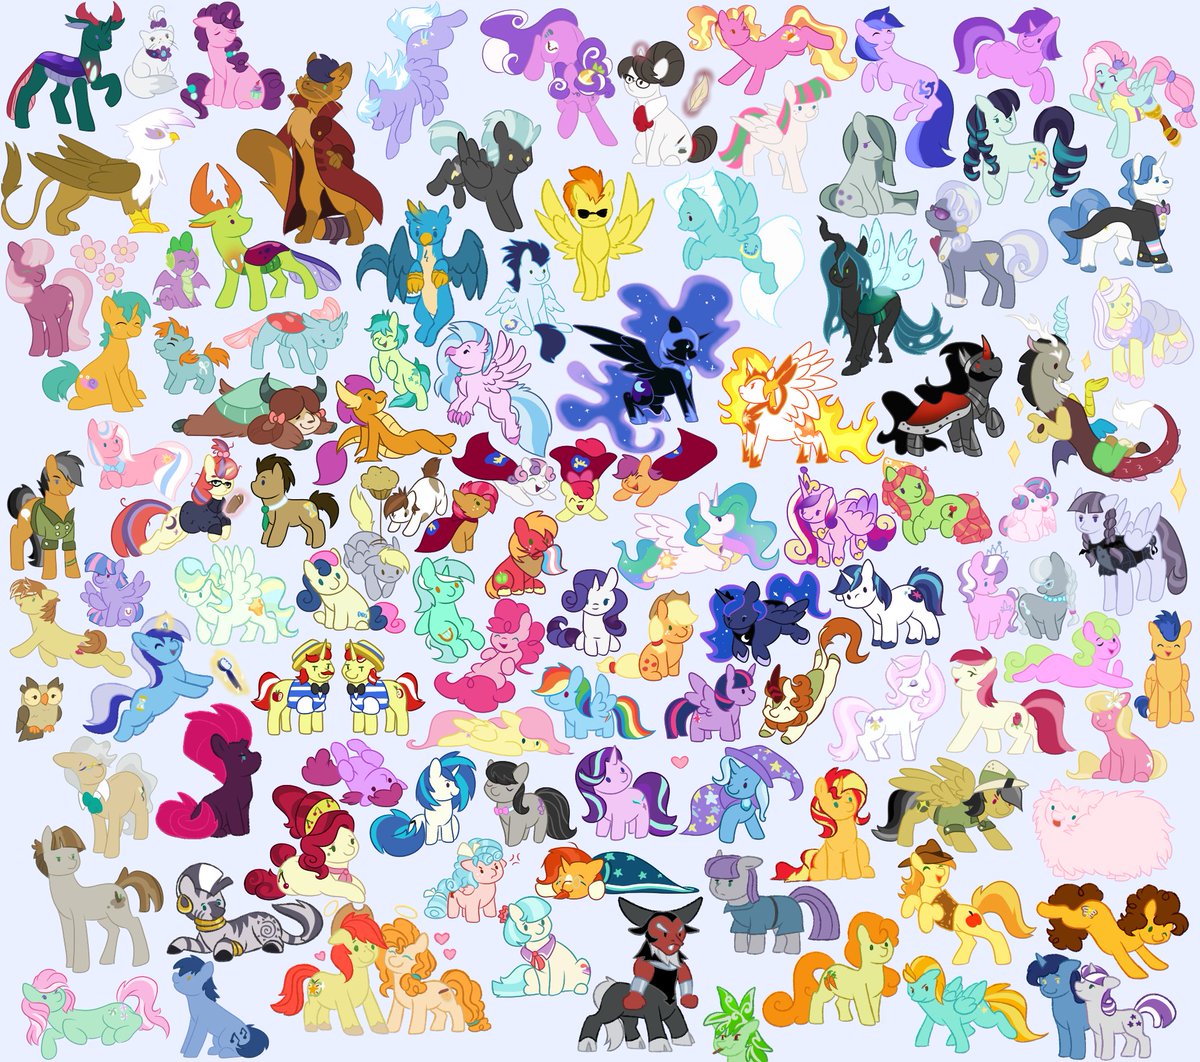 IT'S FINALLY DONE!! i fit as many characters into the pony pile as i could! can you spot your favorites? #MLP